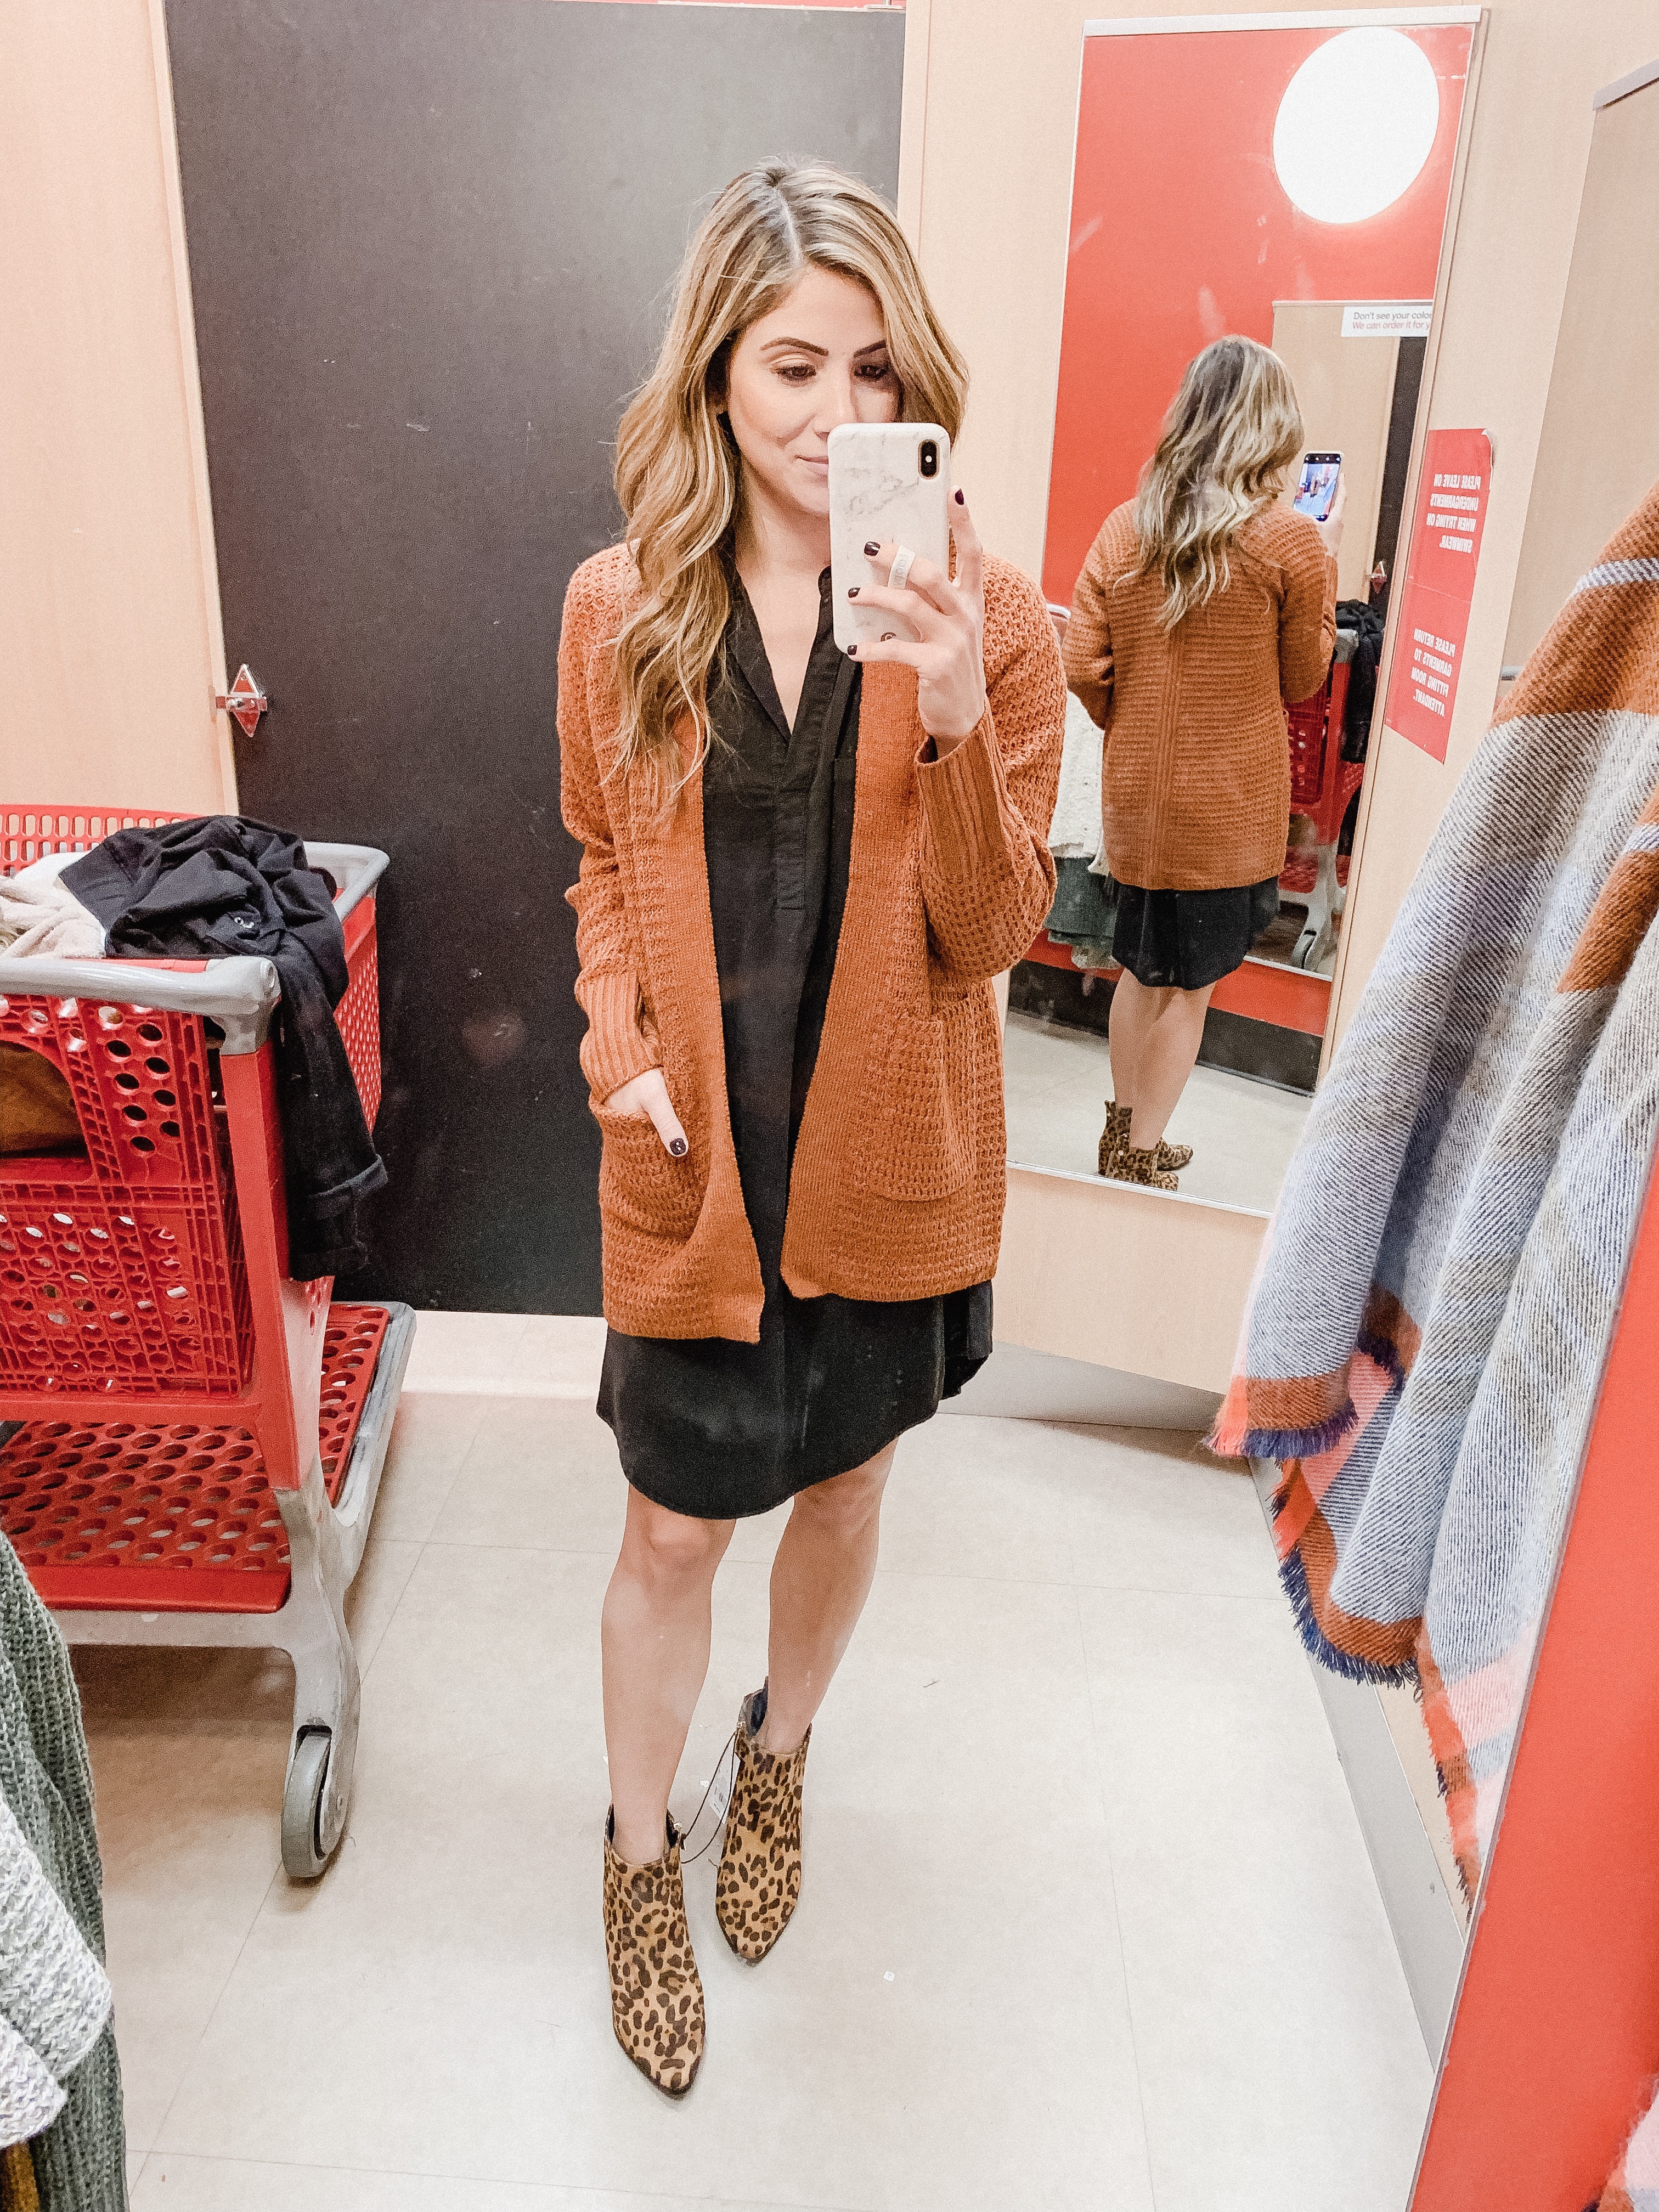 Connecticut life and style blogger Lauren McBride shares a Target Try-On featuring casual and dressy holiday outfit ideas.